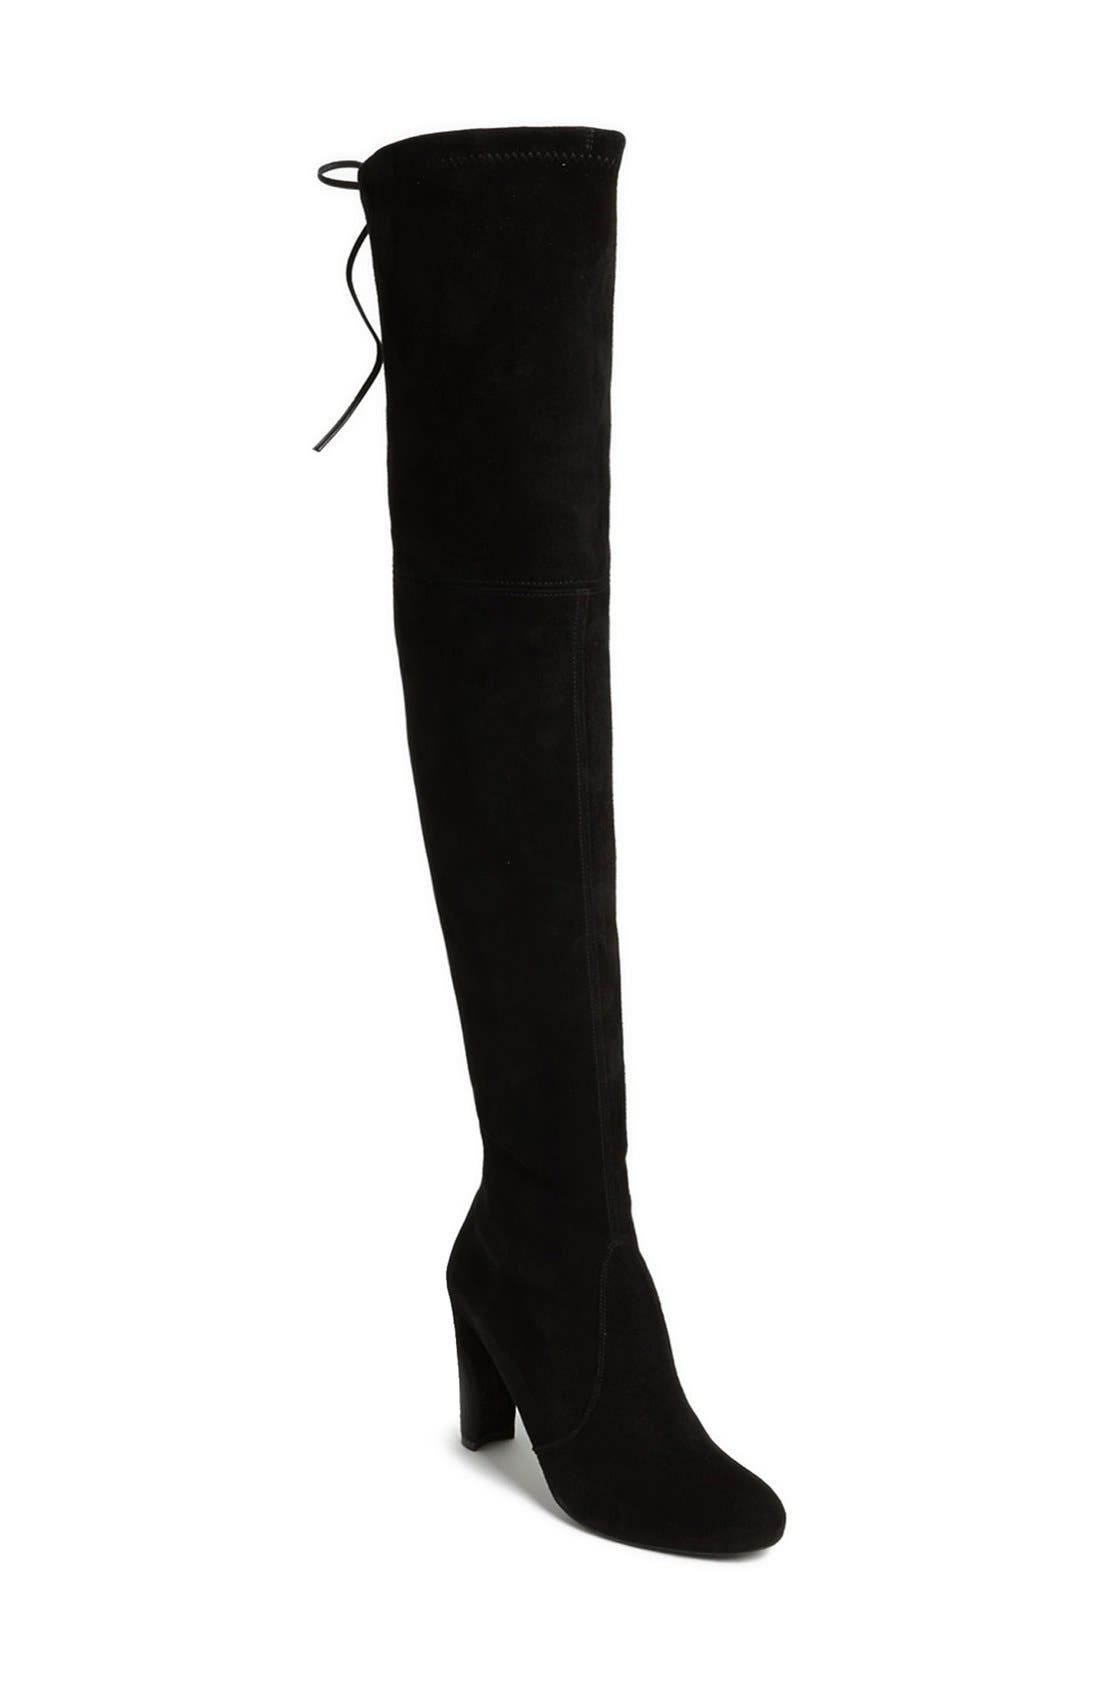 highland over the knee boot